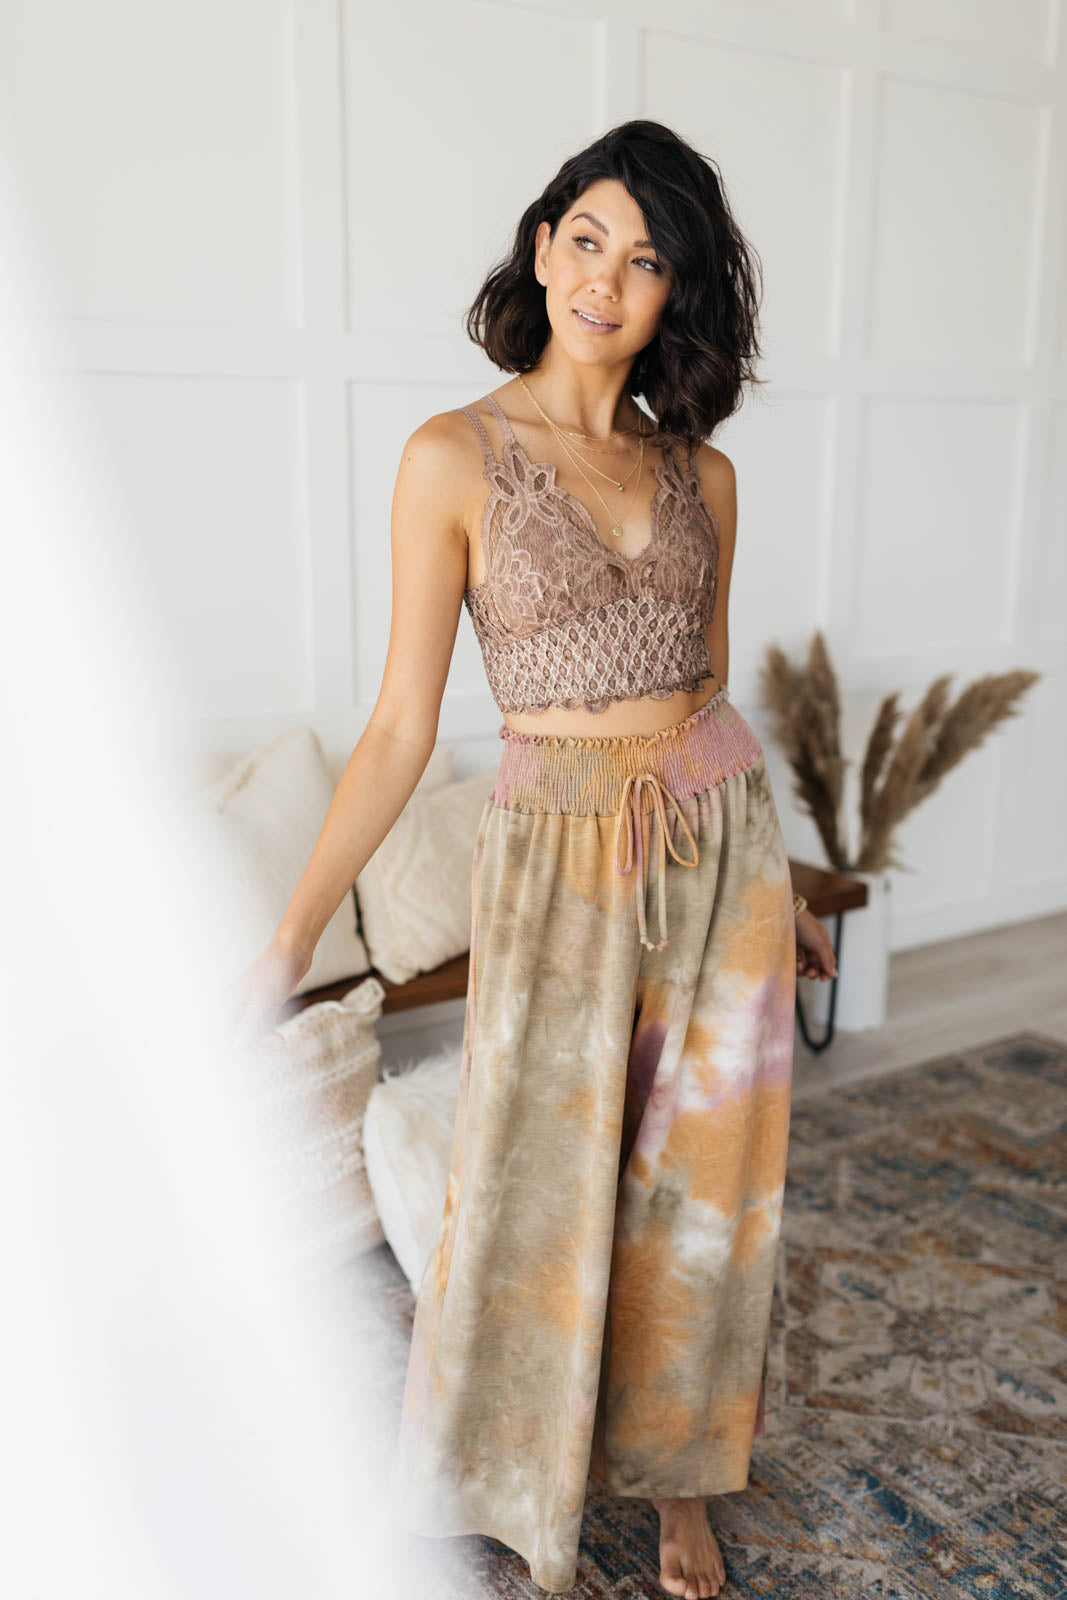 This beautiful lace bralette is perfect for layering. This lightweight, medium support bralette brings a feminine touch to any outfit. Pair it with a t-shirt or oversized sweater for a comfortable and flirty look! S - XL